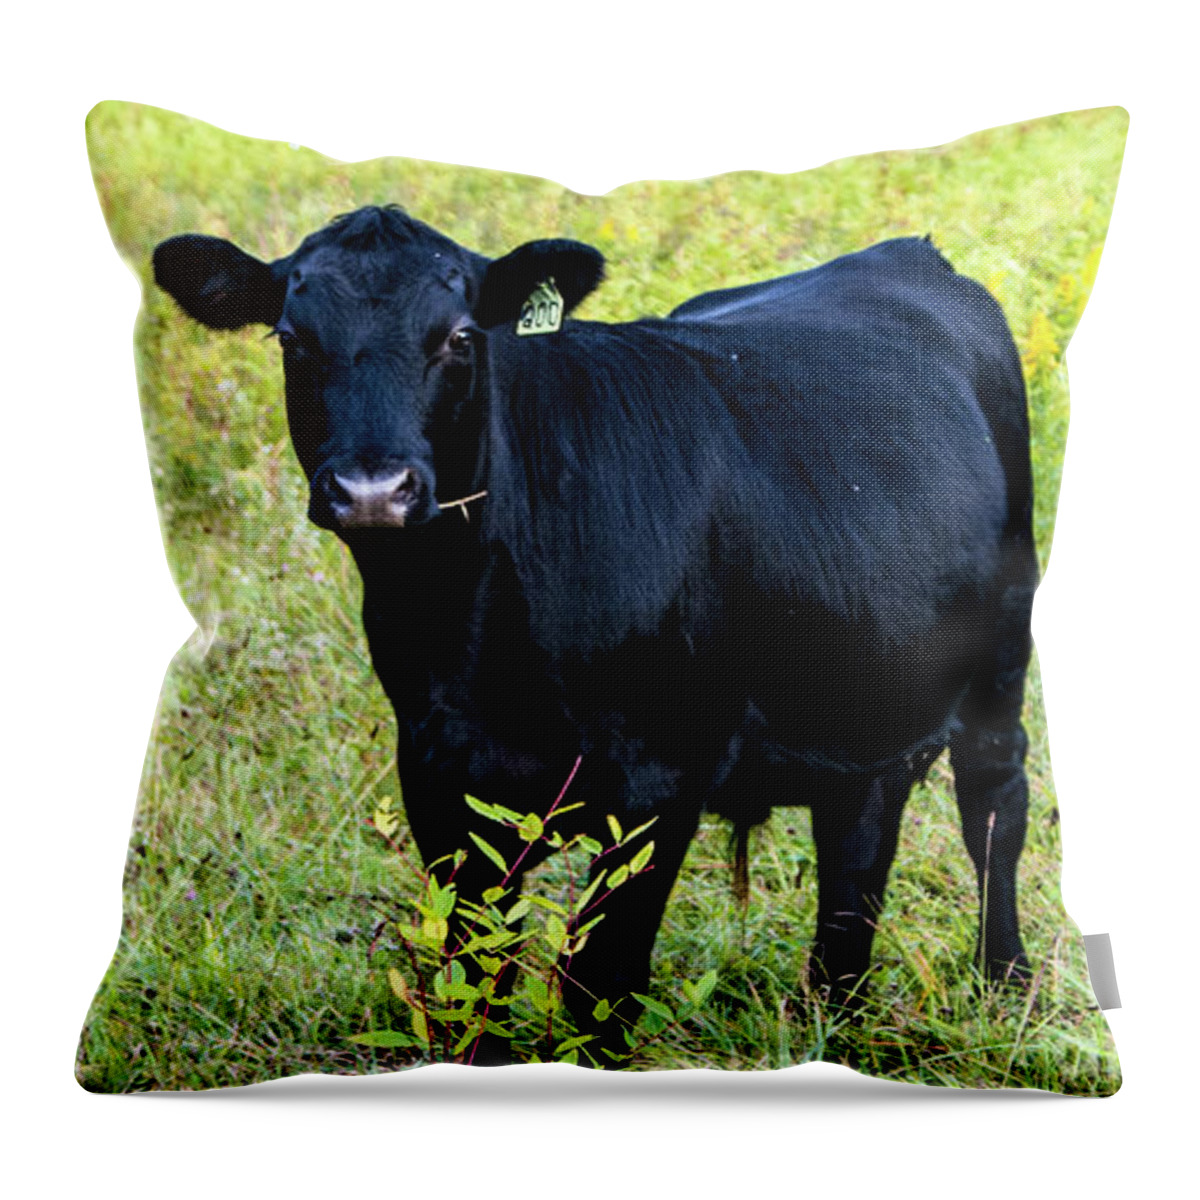 Angus Throw Pillow featuring the photograph Black Angus Steer by Kevin Gladwell